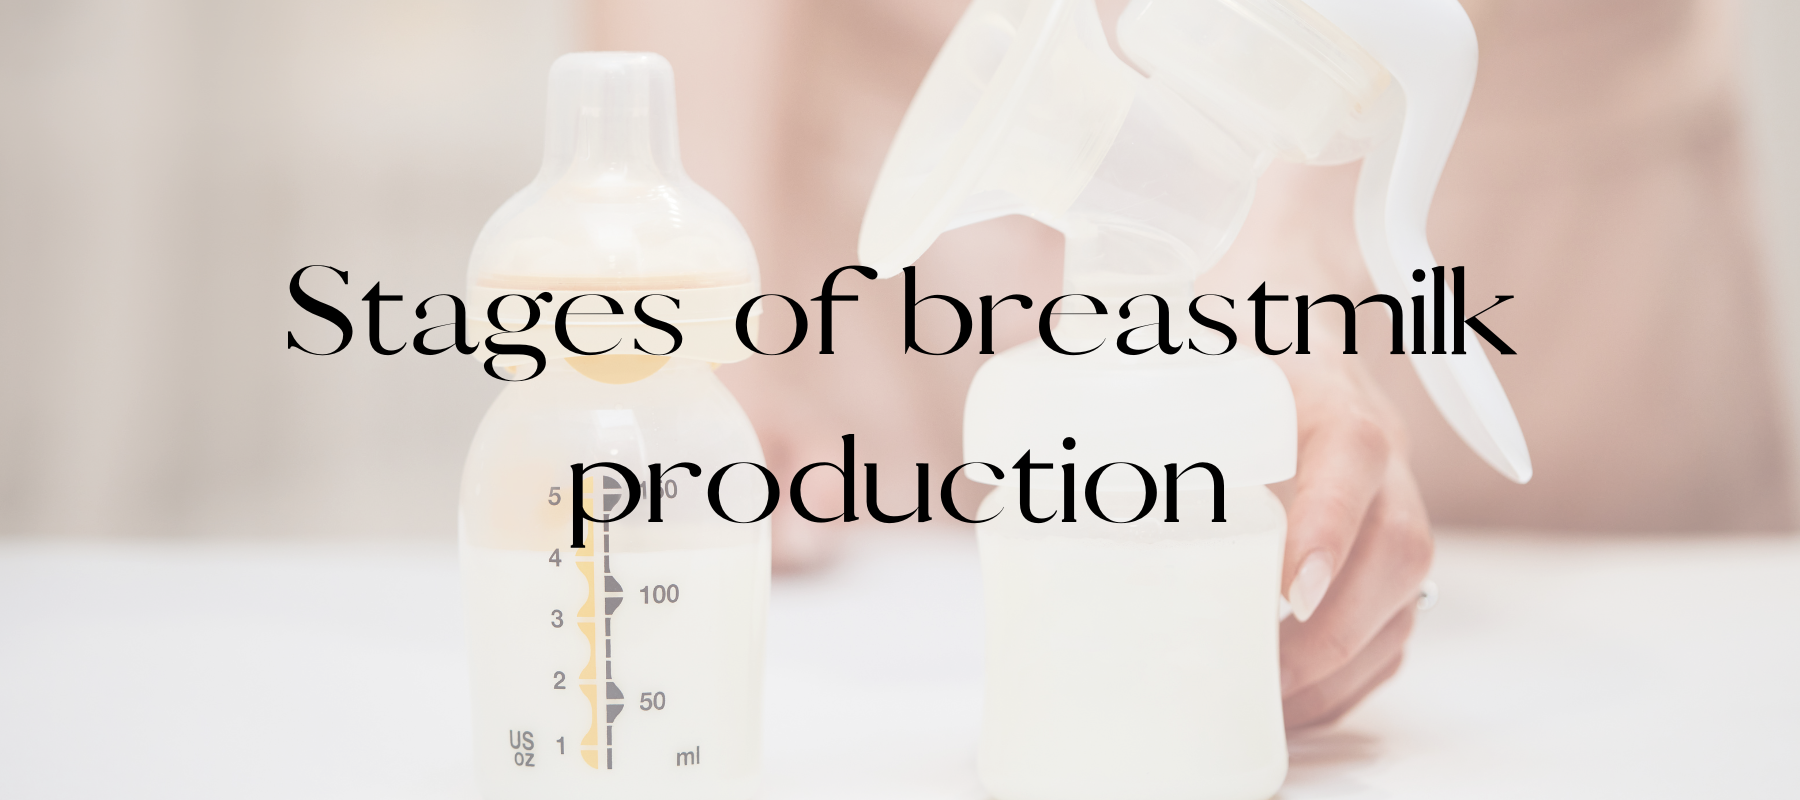 Stages of breastmilk production